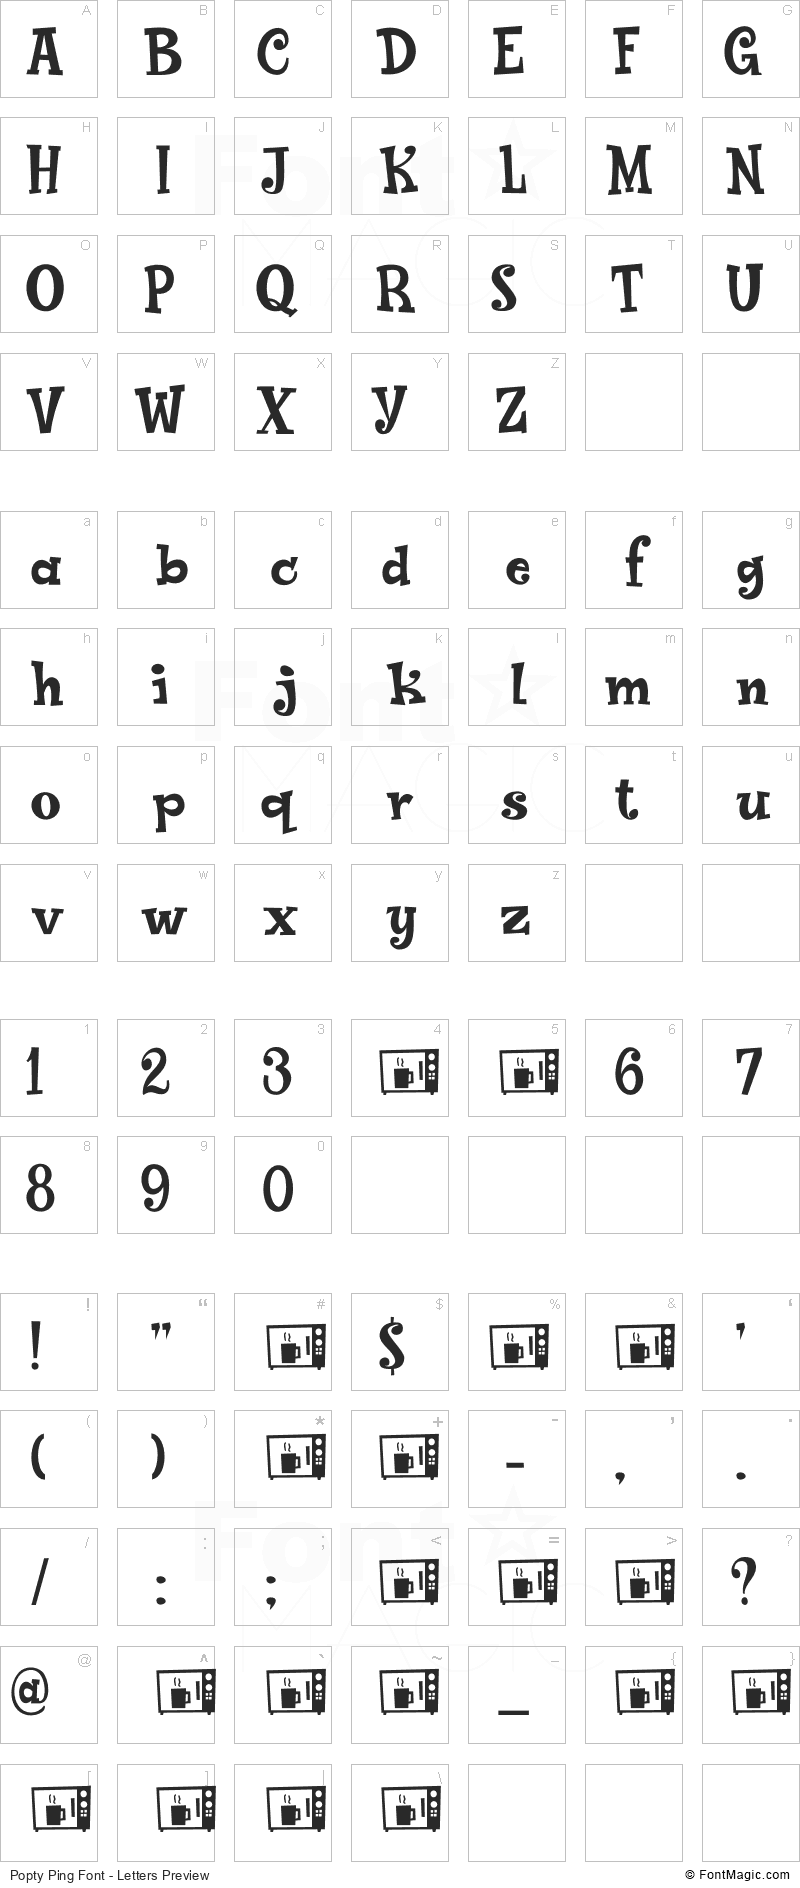 Popty Ping Font - All Latters Preview Chart